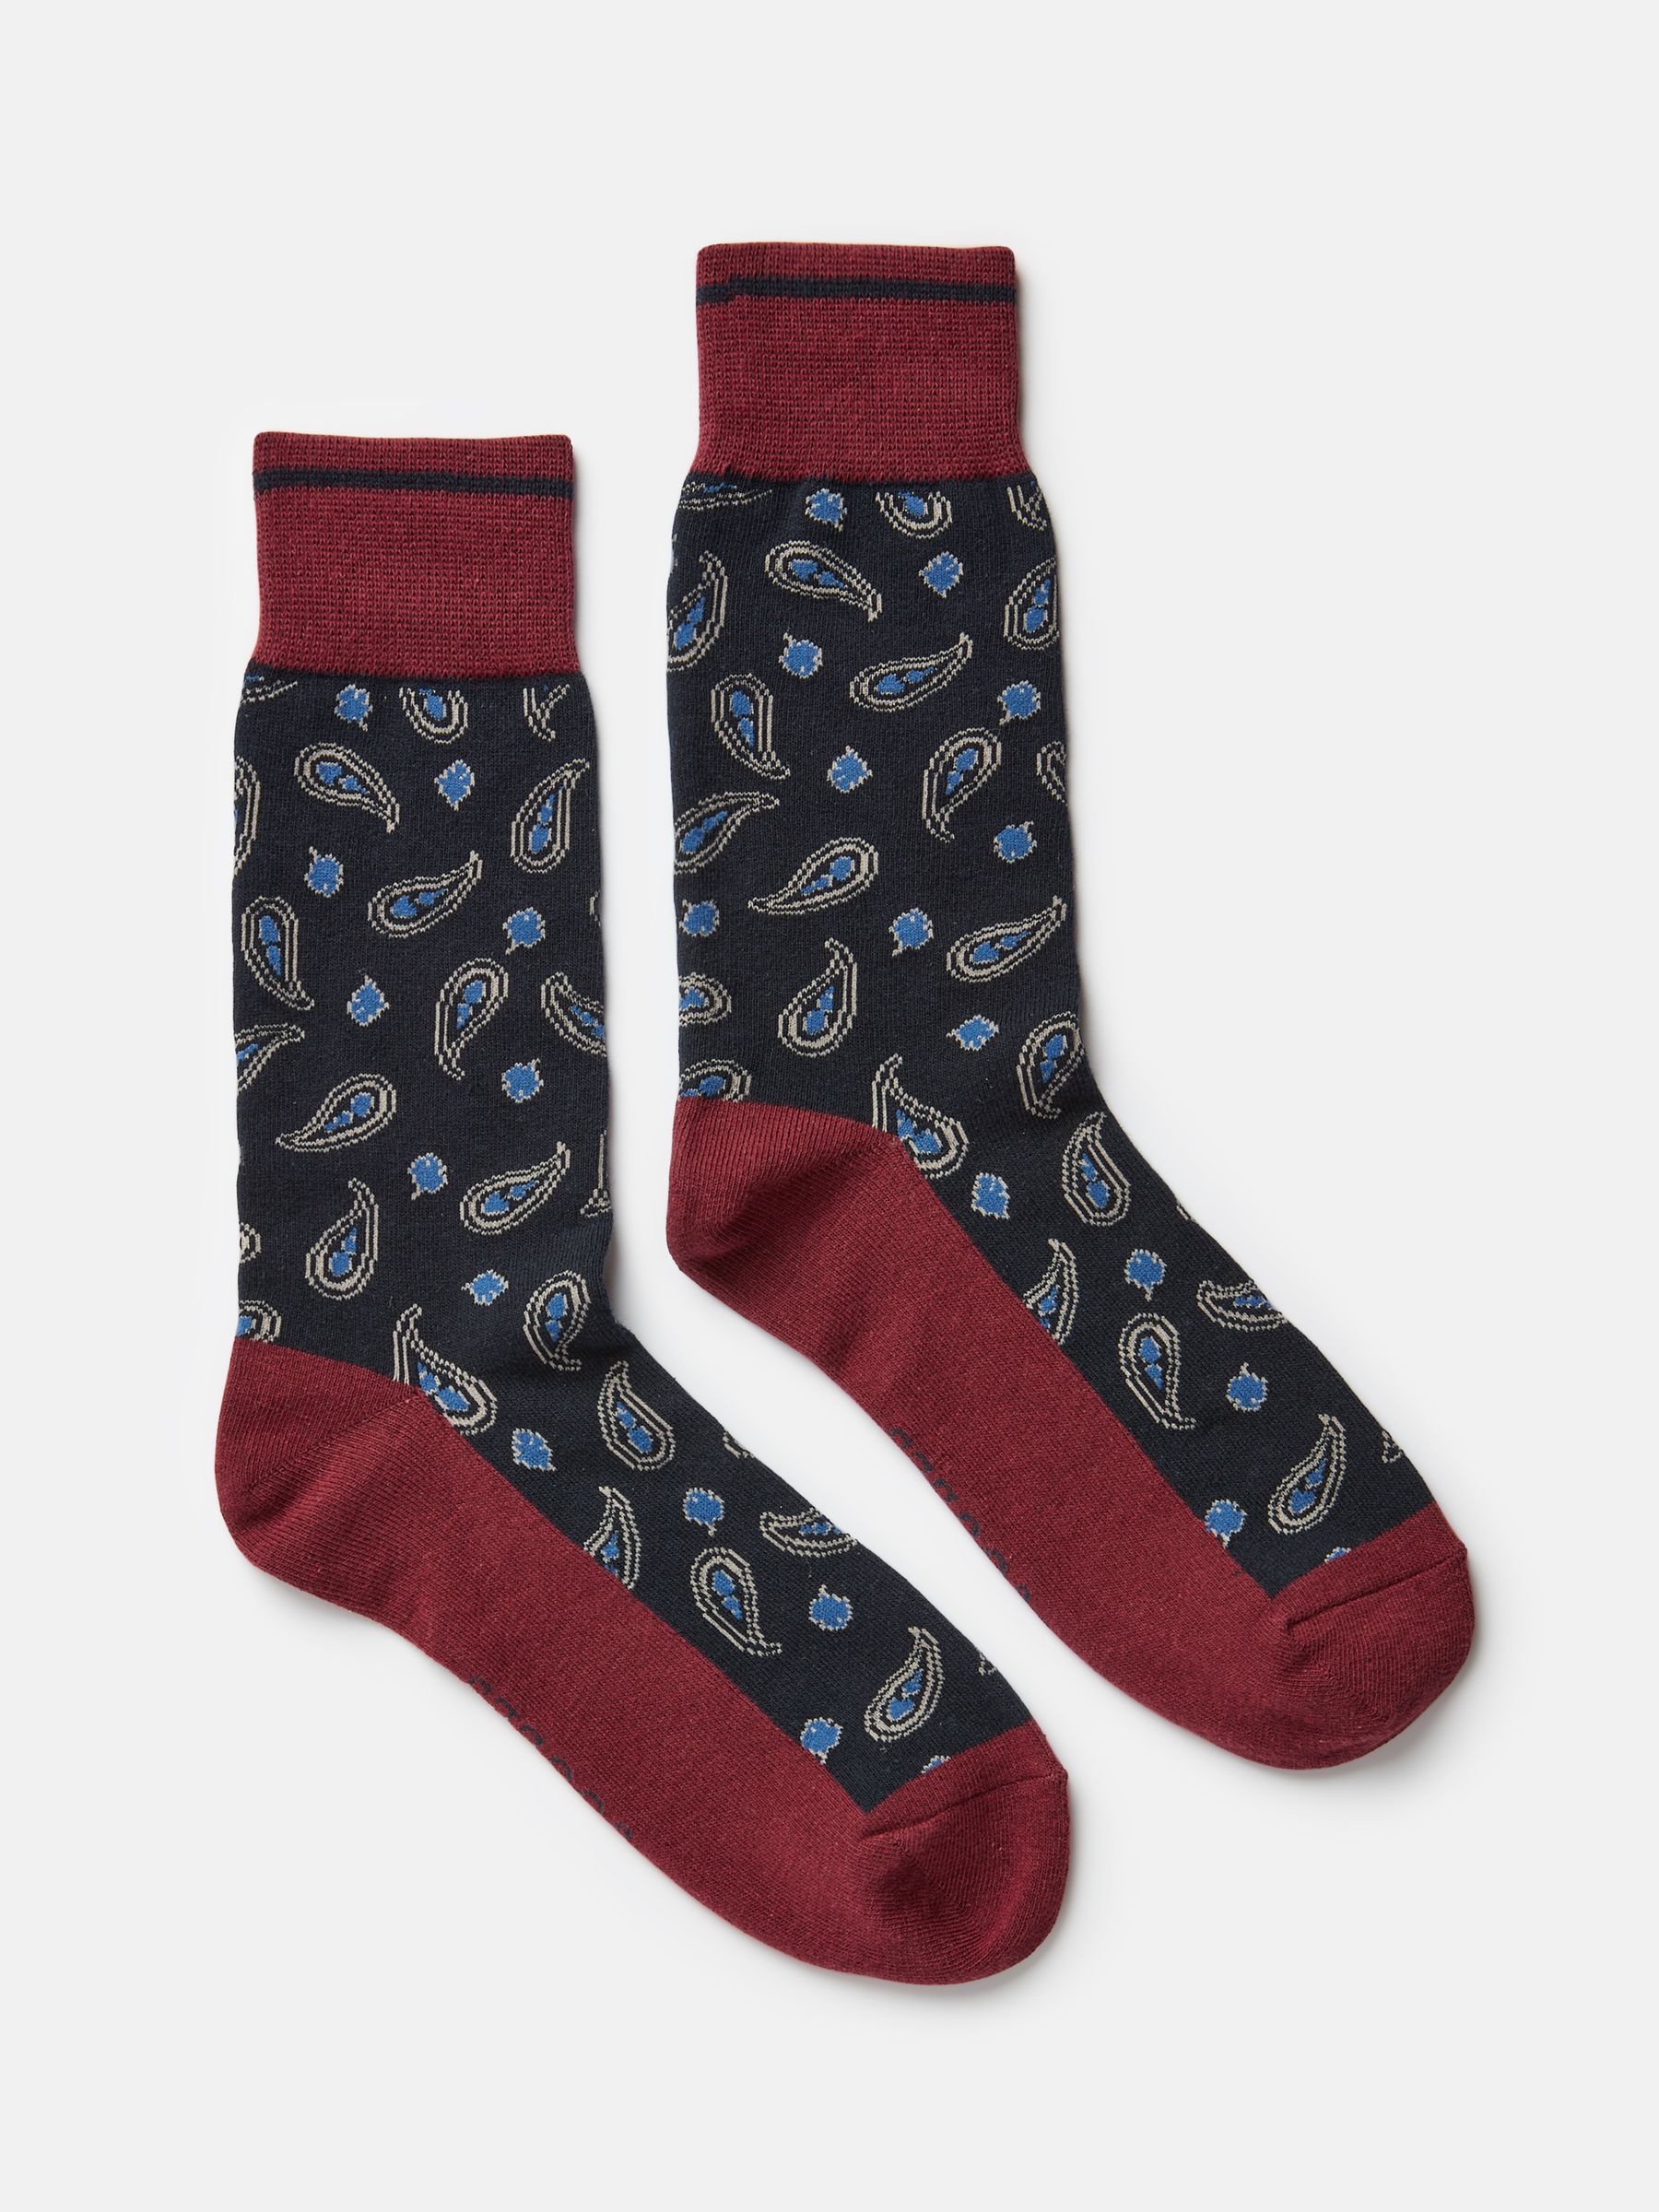 Buy Navy Ankle Socks from the Joules online shop